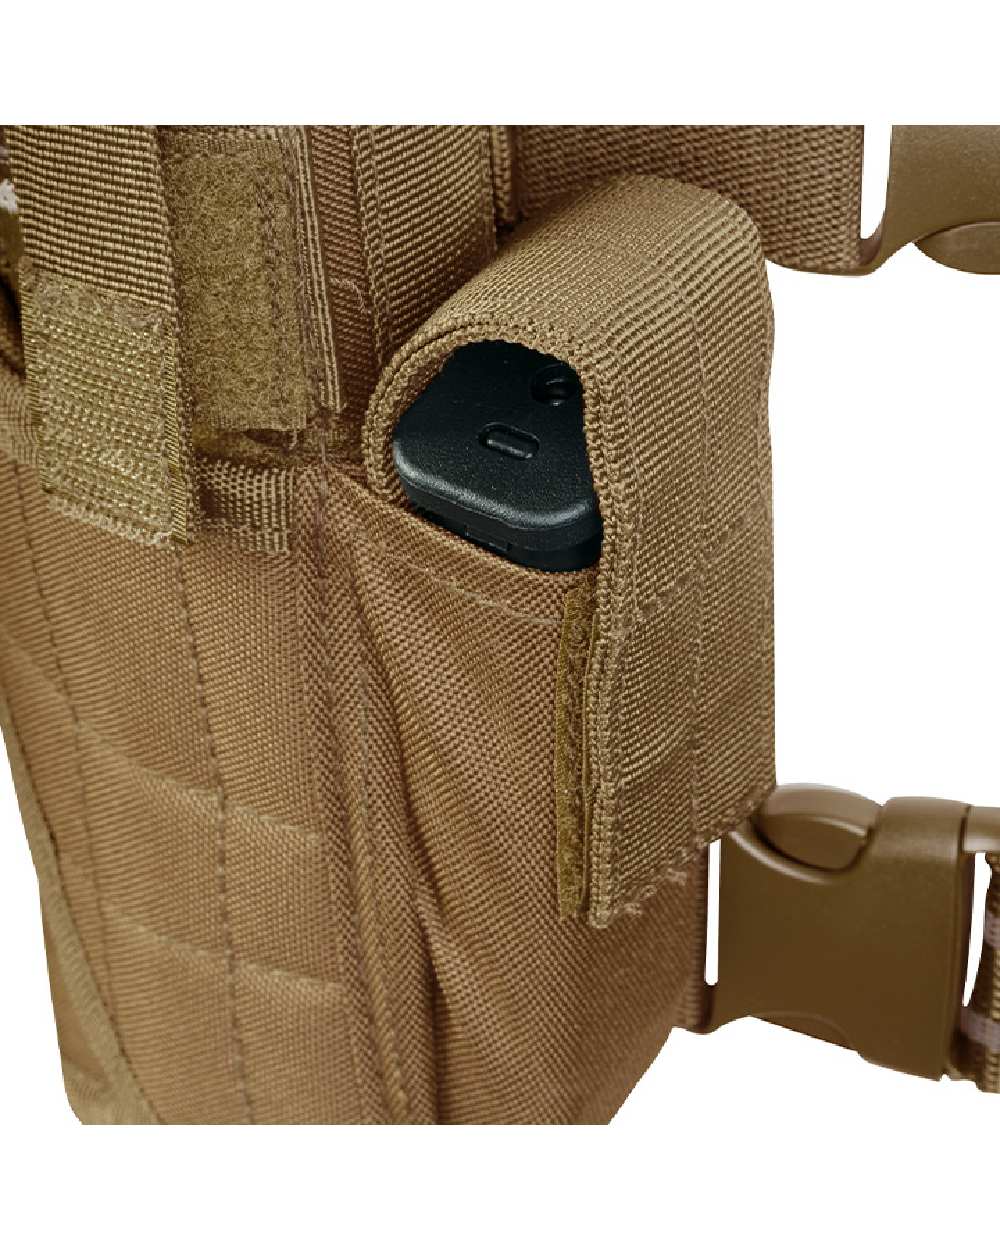 Viper Adjustable Holster in Coyote 